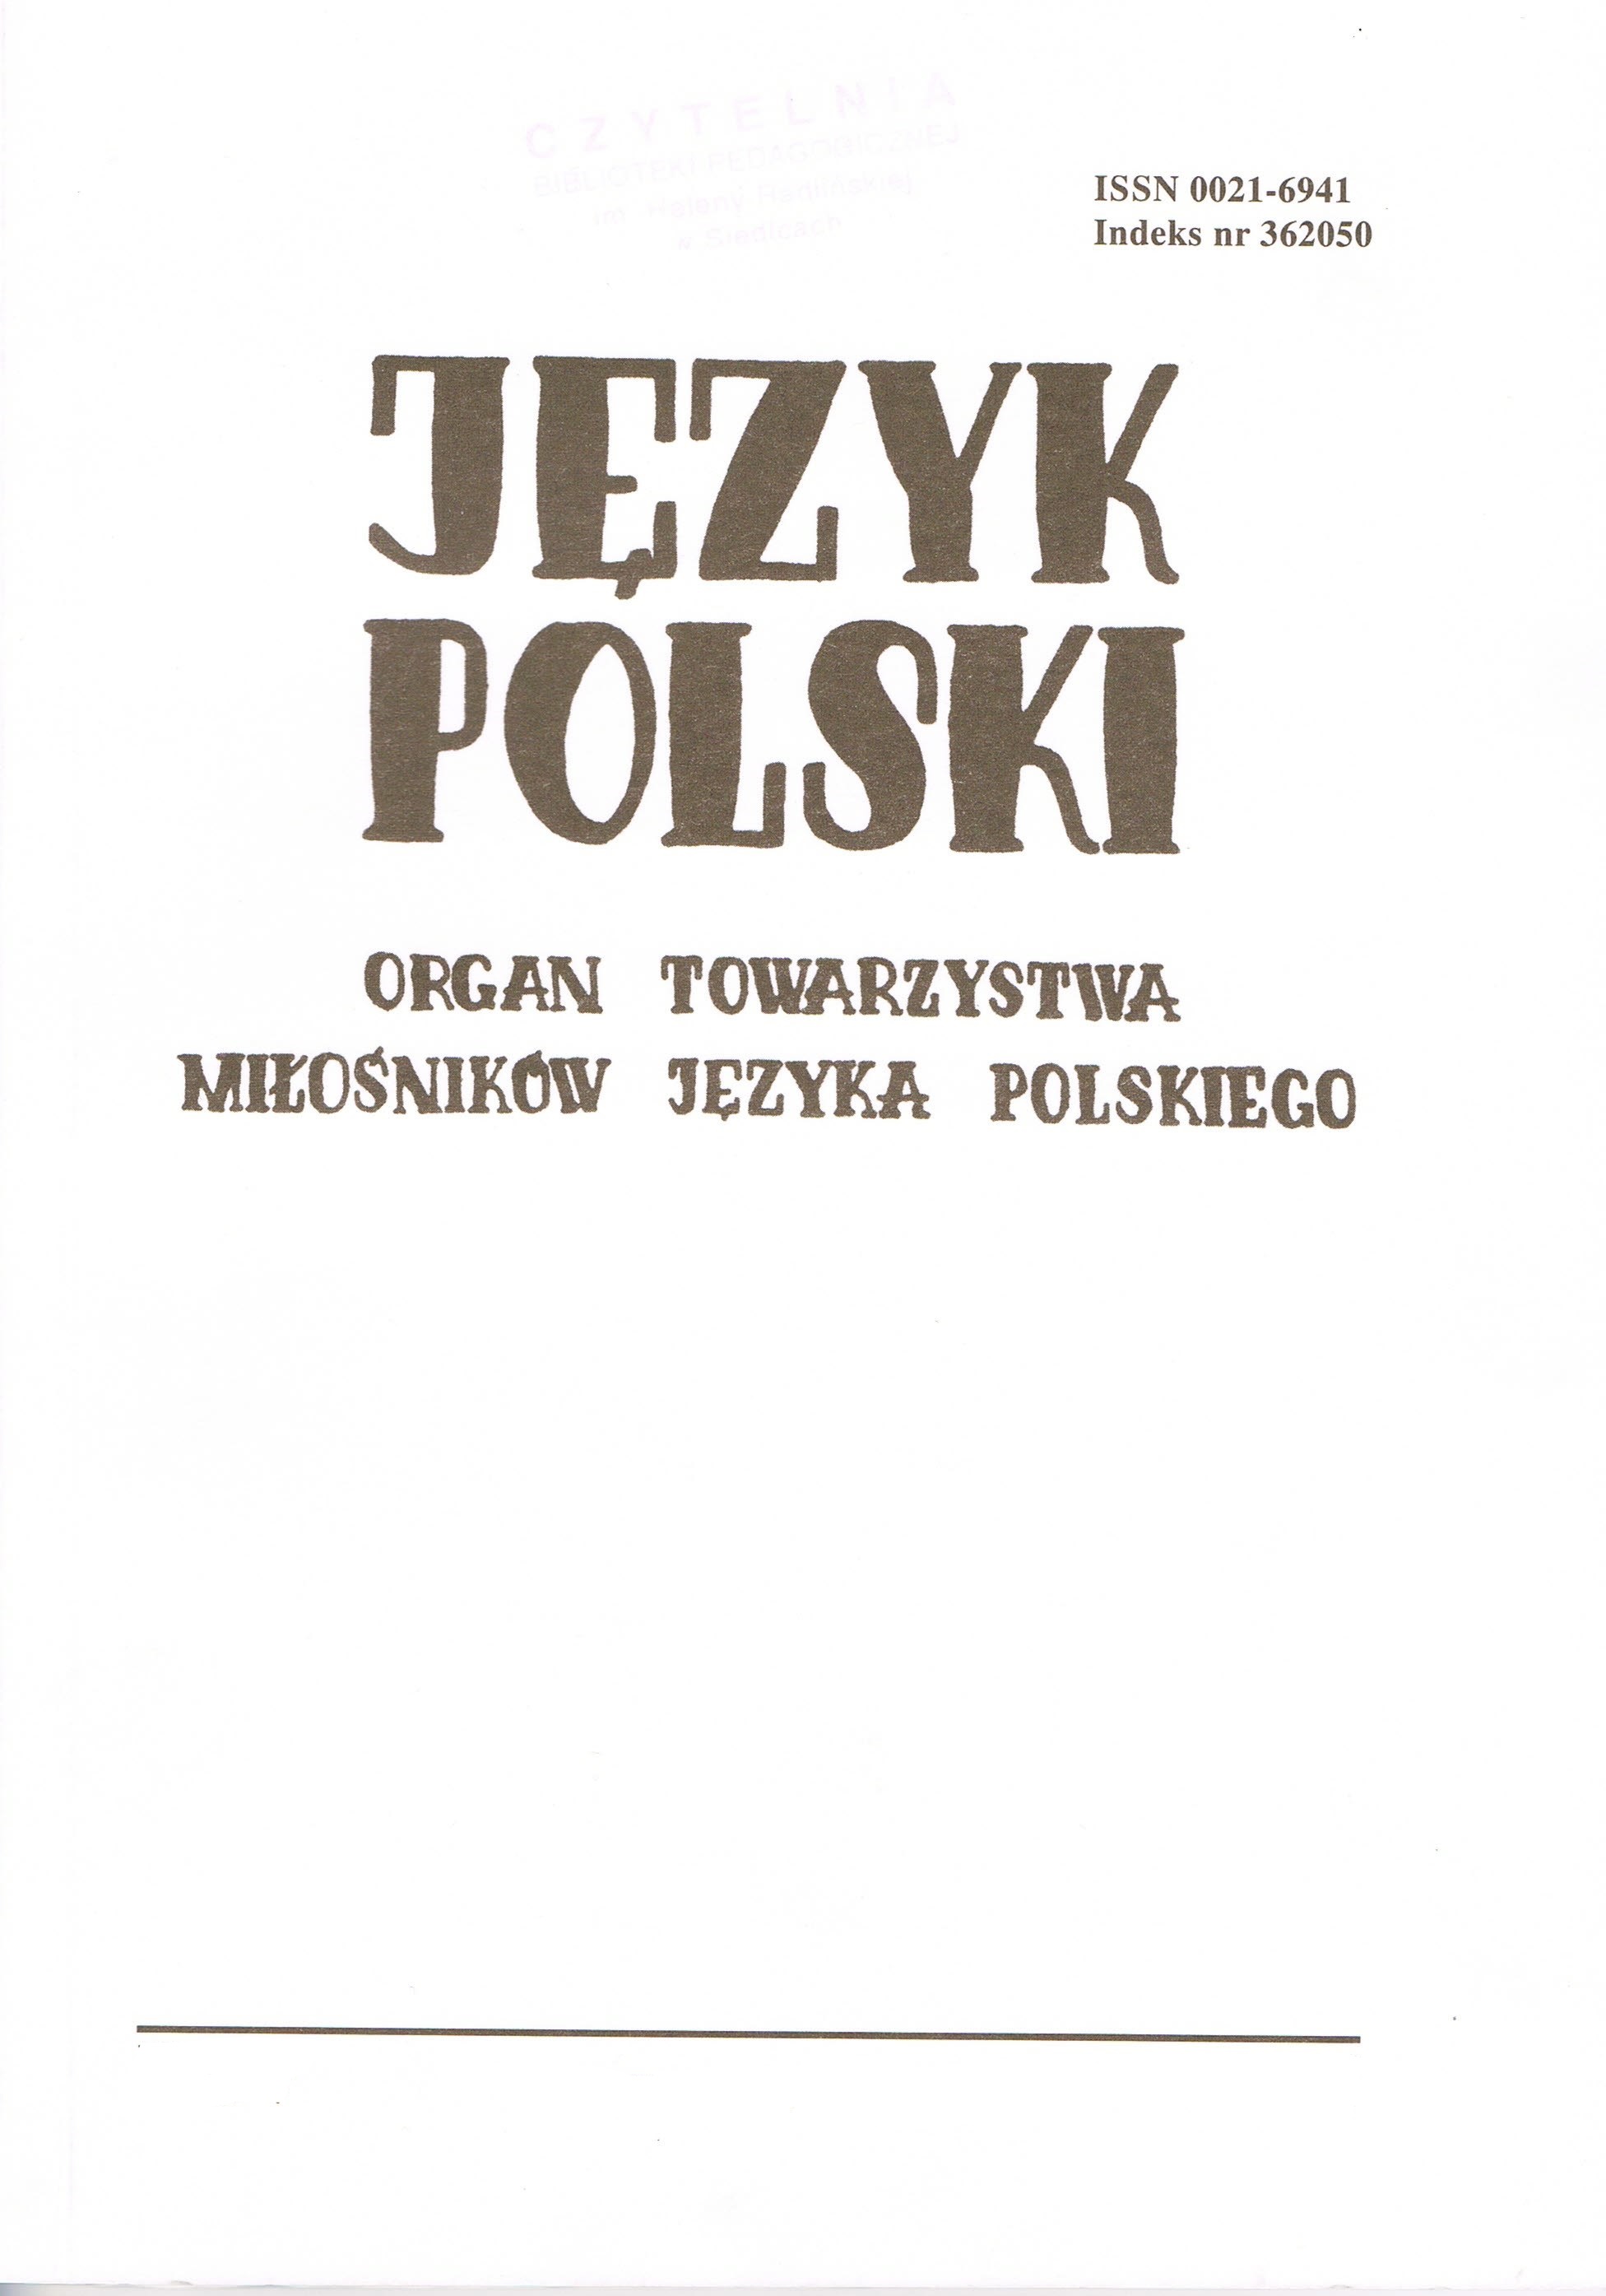 Appeal from Jasna Góra — a collection genre Cover Image